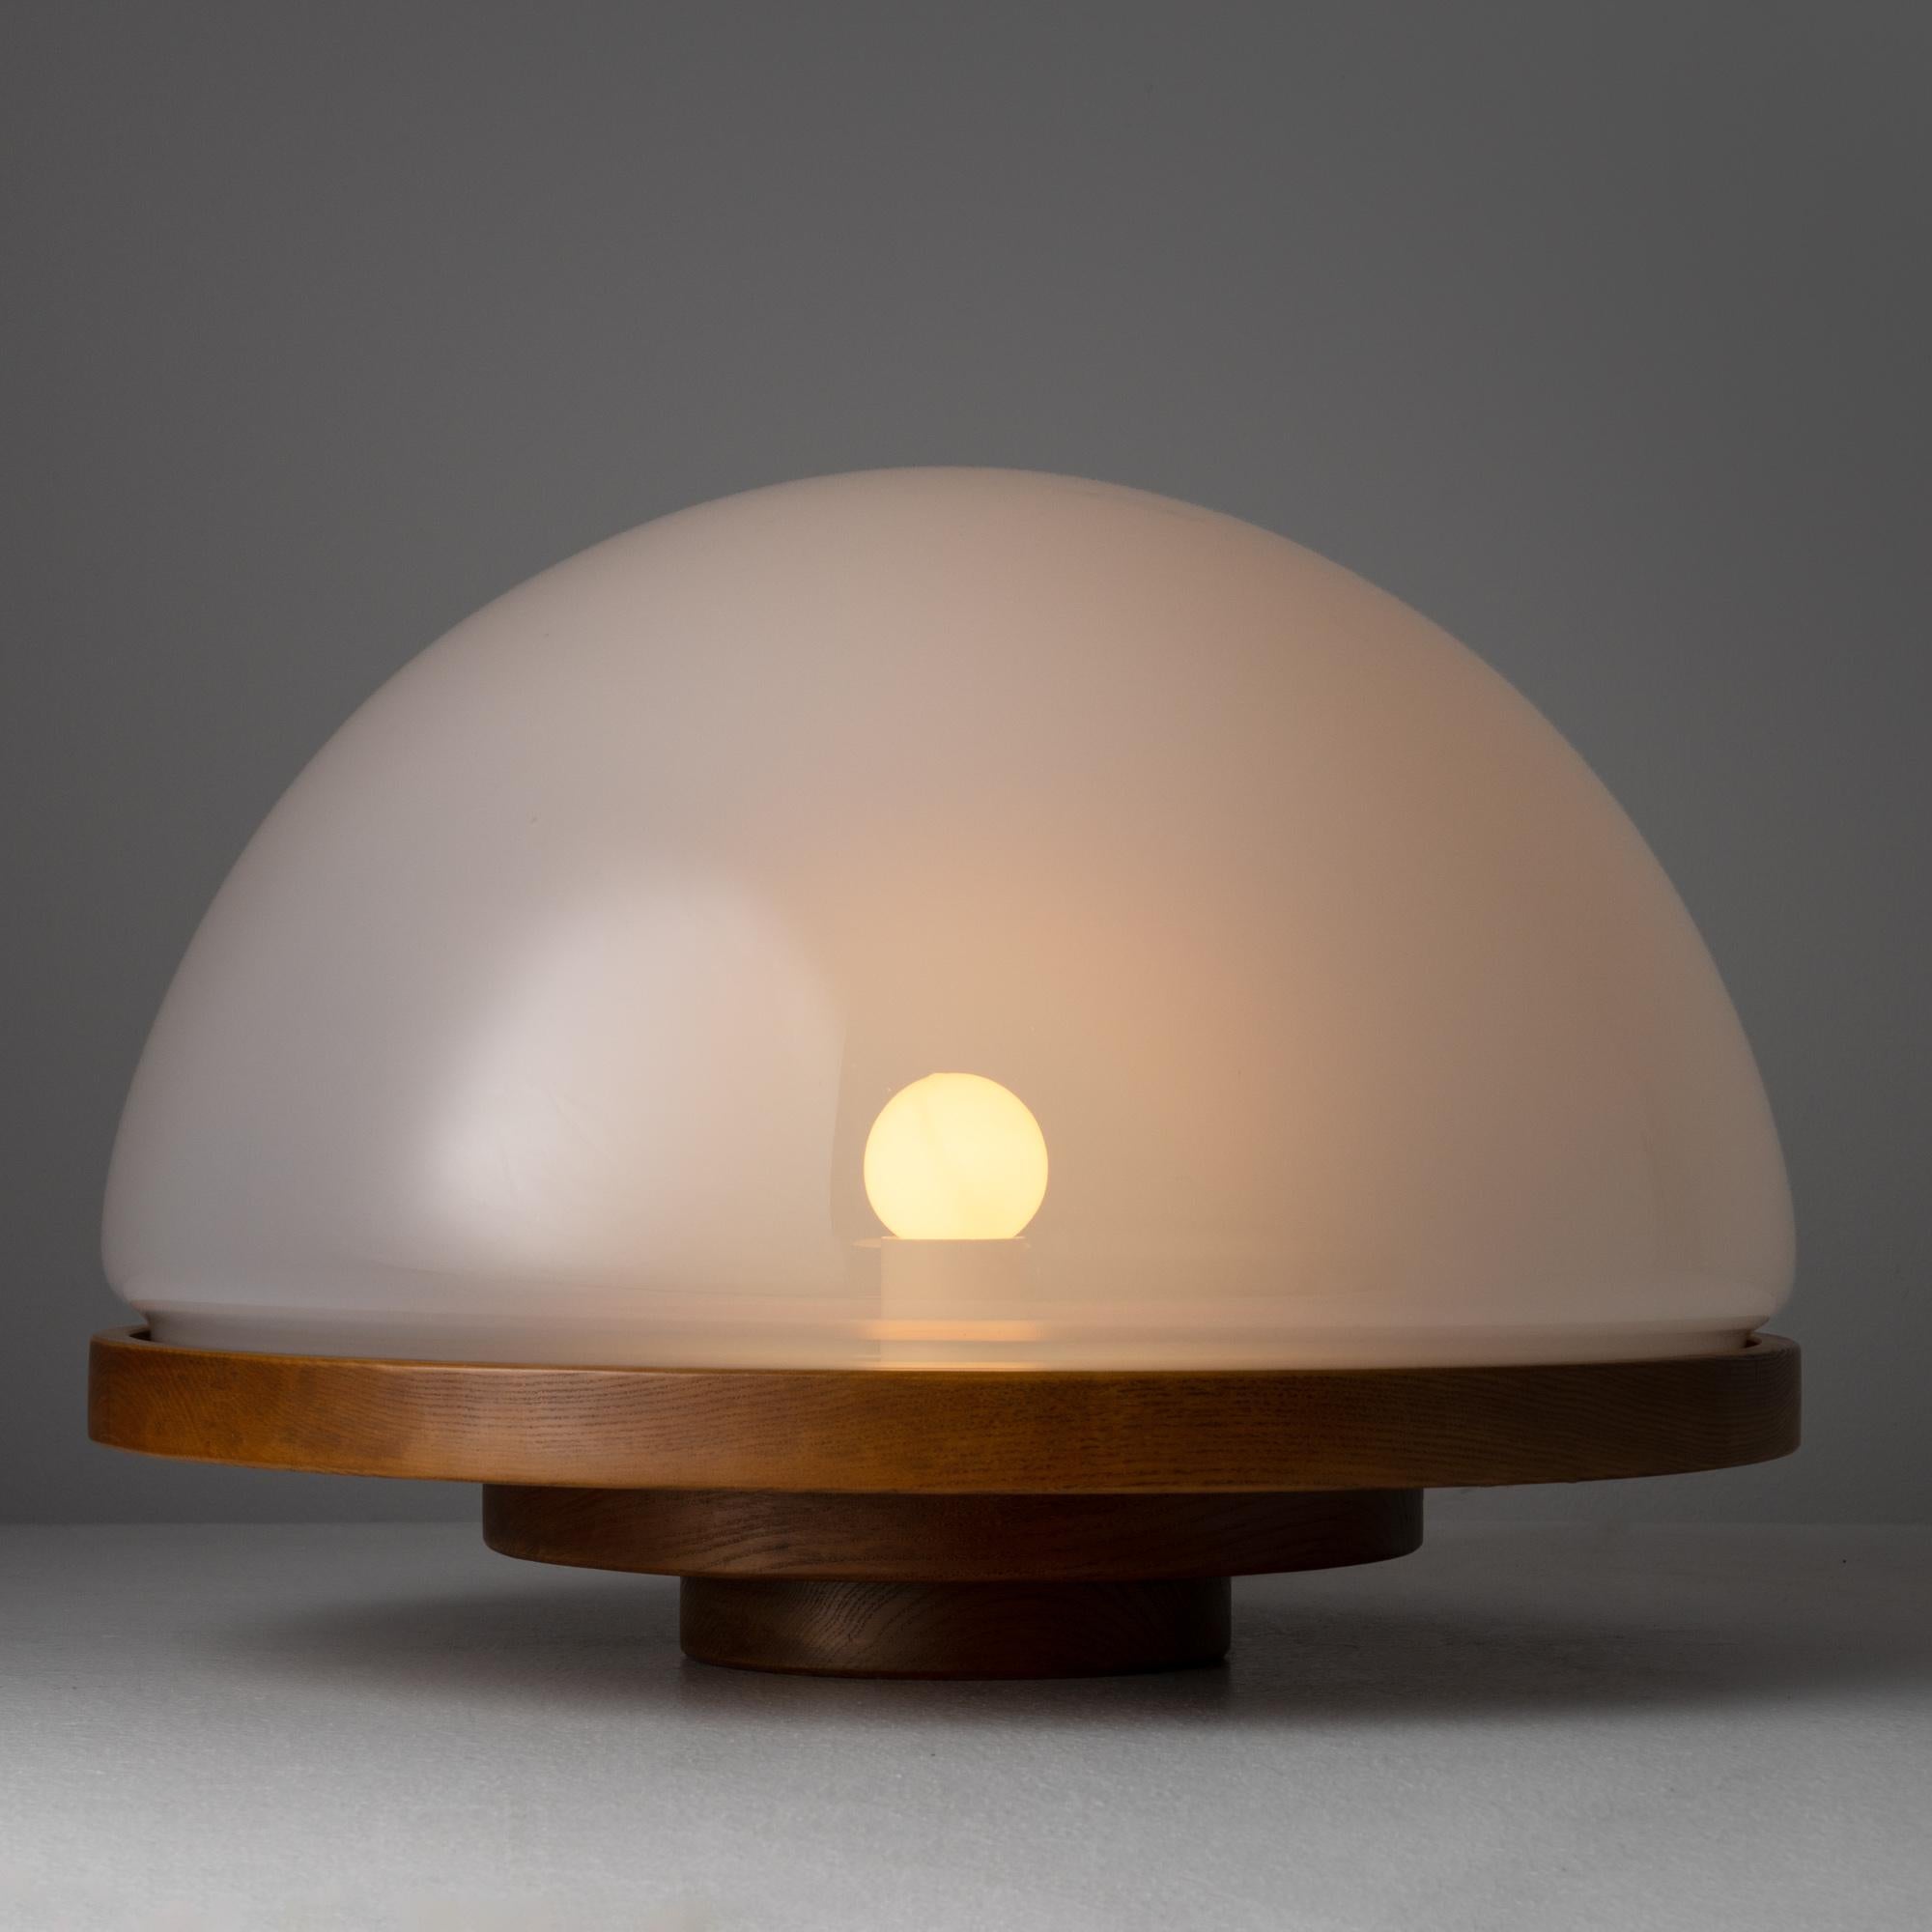 Model 3/3 Selenova table lamp by Luigi Massoni. Designed and manufactured in Italy circa the 1970s. This lamp is a simple yet sophisticated design with a tiered hardwood cylindrical base, holding a beautiful clear sandblasted piece of blown glass.